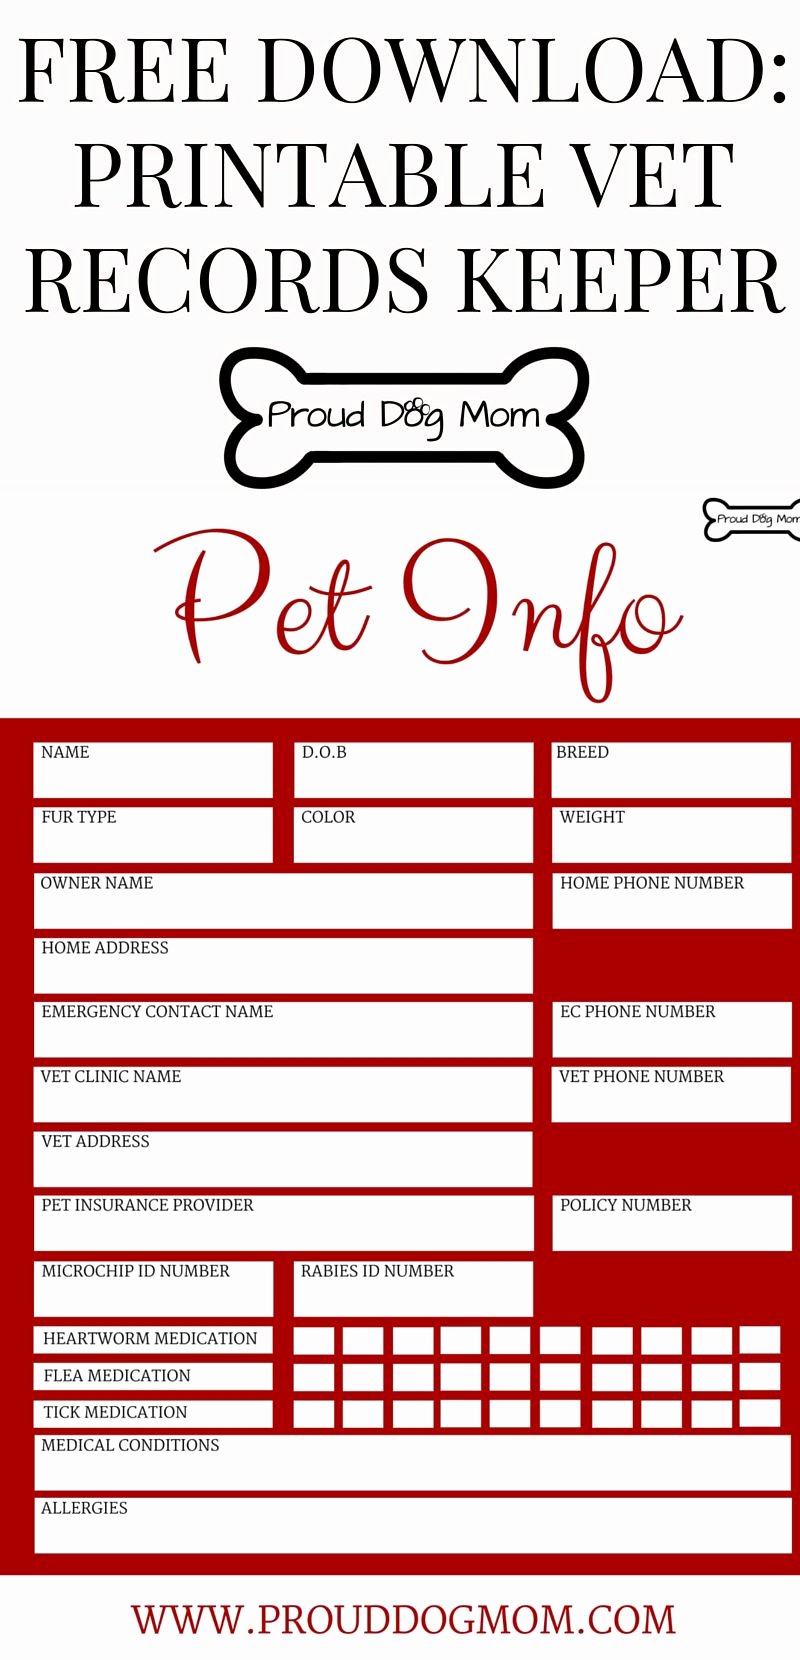 Puppy Record Template Beautiful Free Download Printable Vet Records Keeper